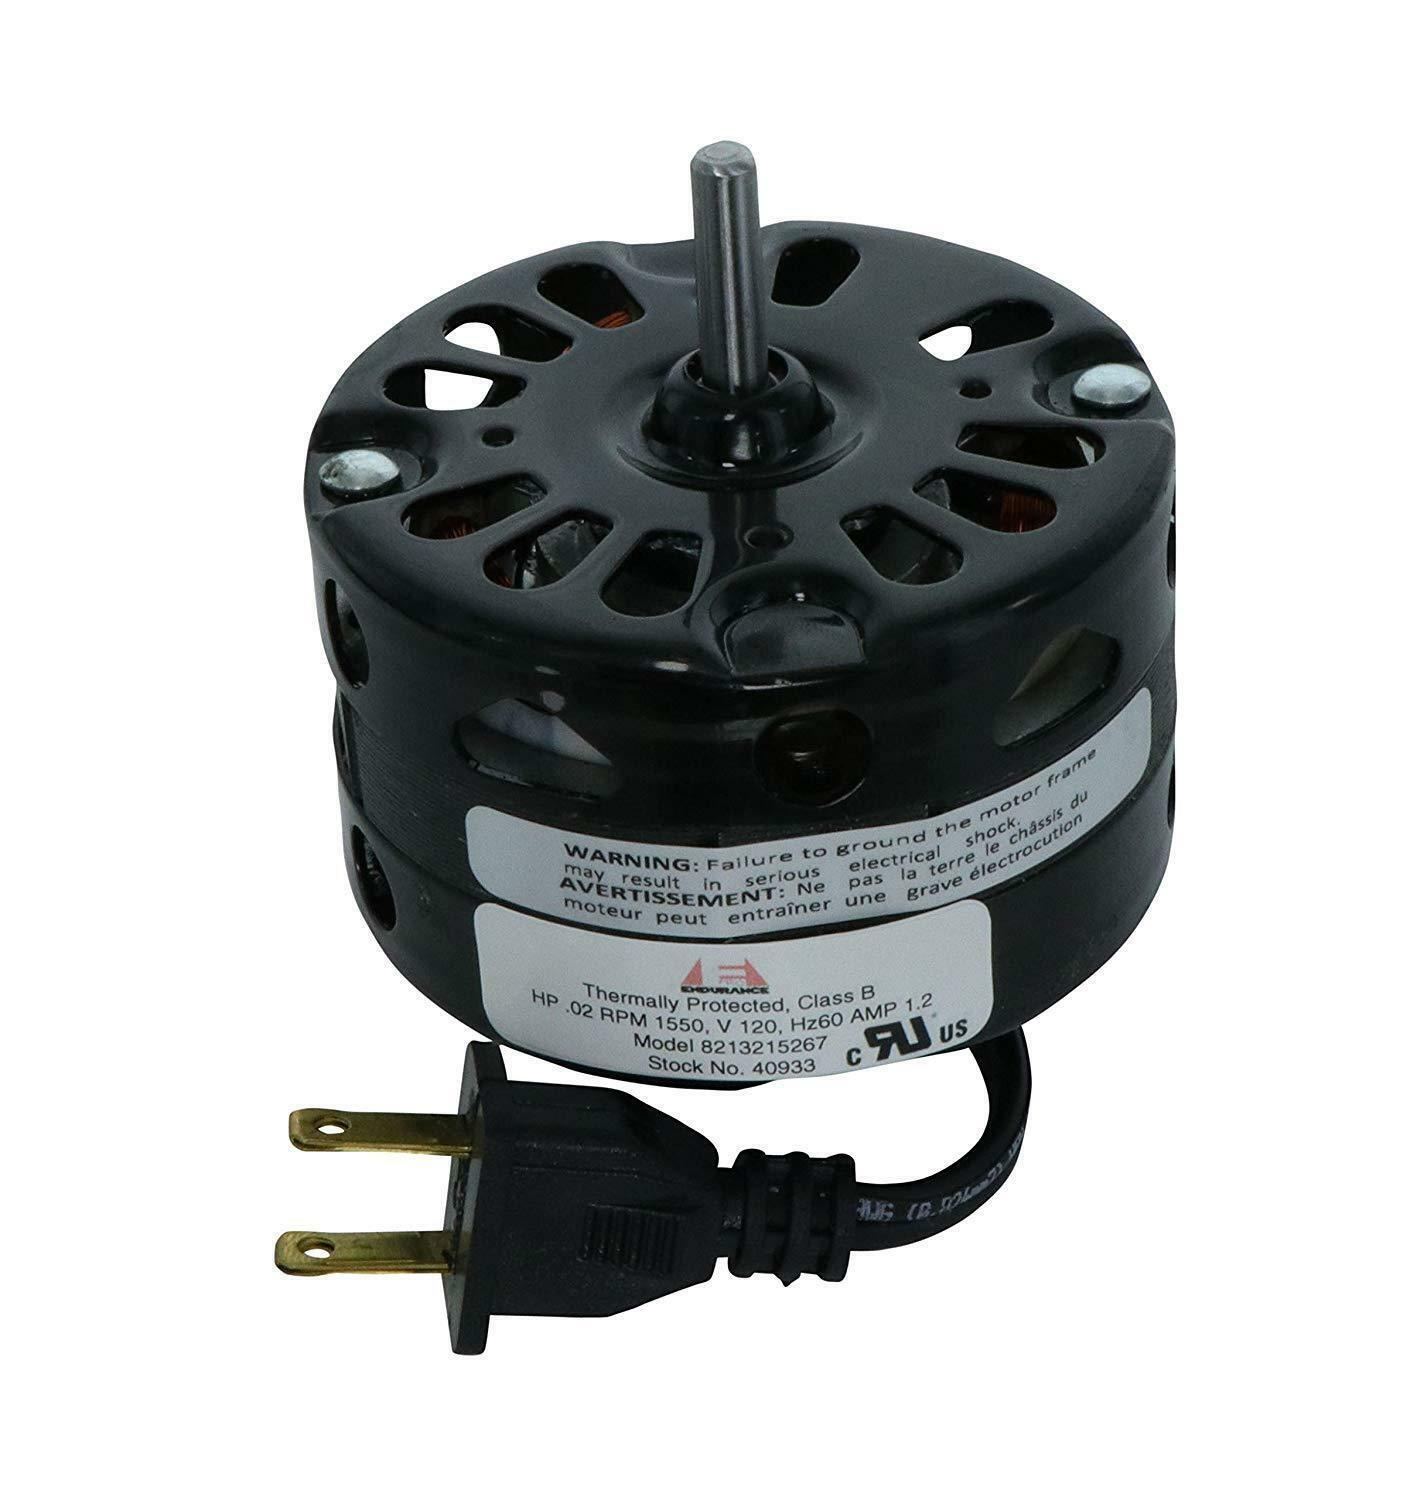 33 Ventilation Fan Motor 120v For Bathroom Kitchen Exhaust pertaining to dimensions 1424 X 1500